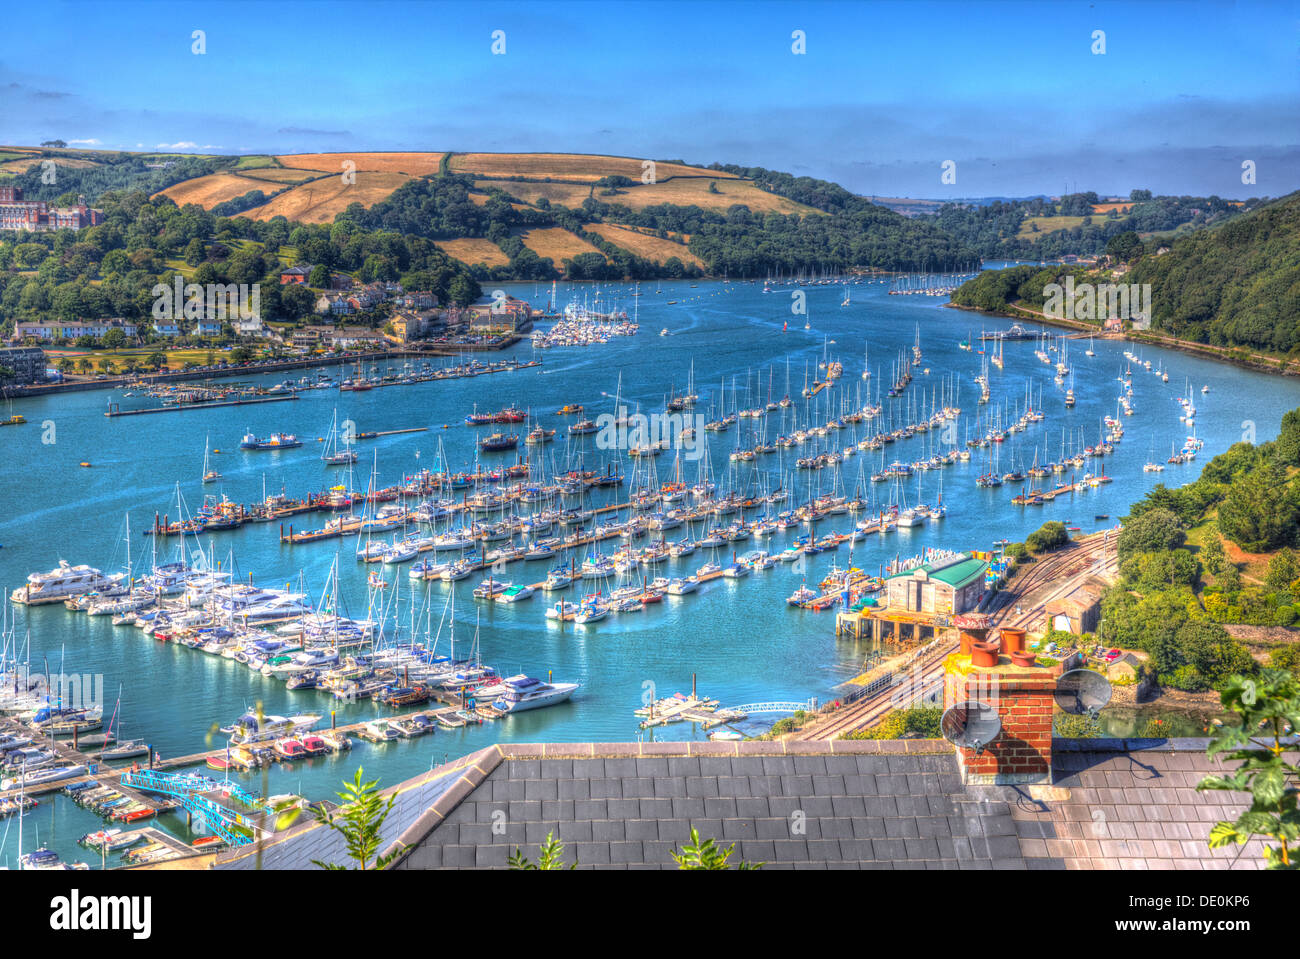 View of Dartmouth Devon and boats on Dart river in vivid HDR on blue sky summer day Stock Photo